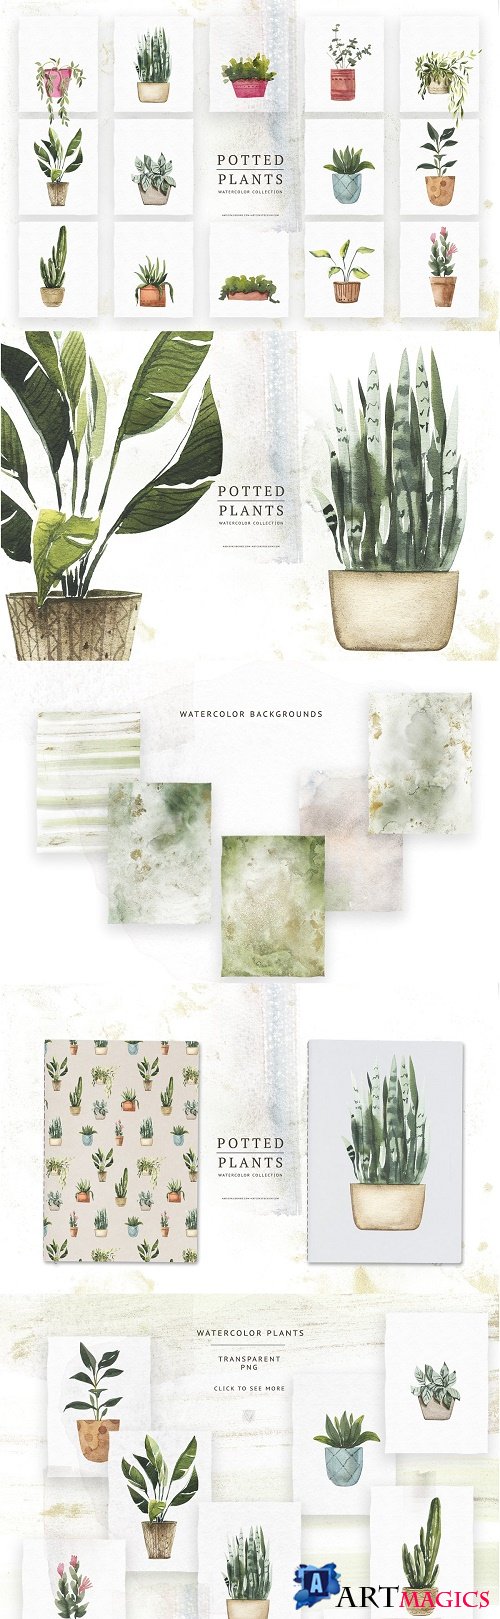 Watercolor Potted Plants - 3137953